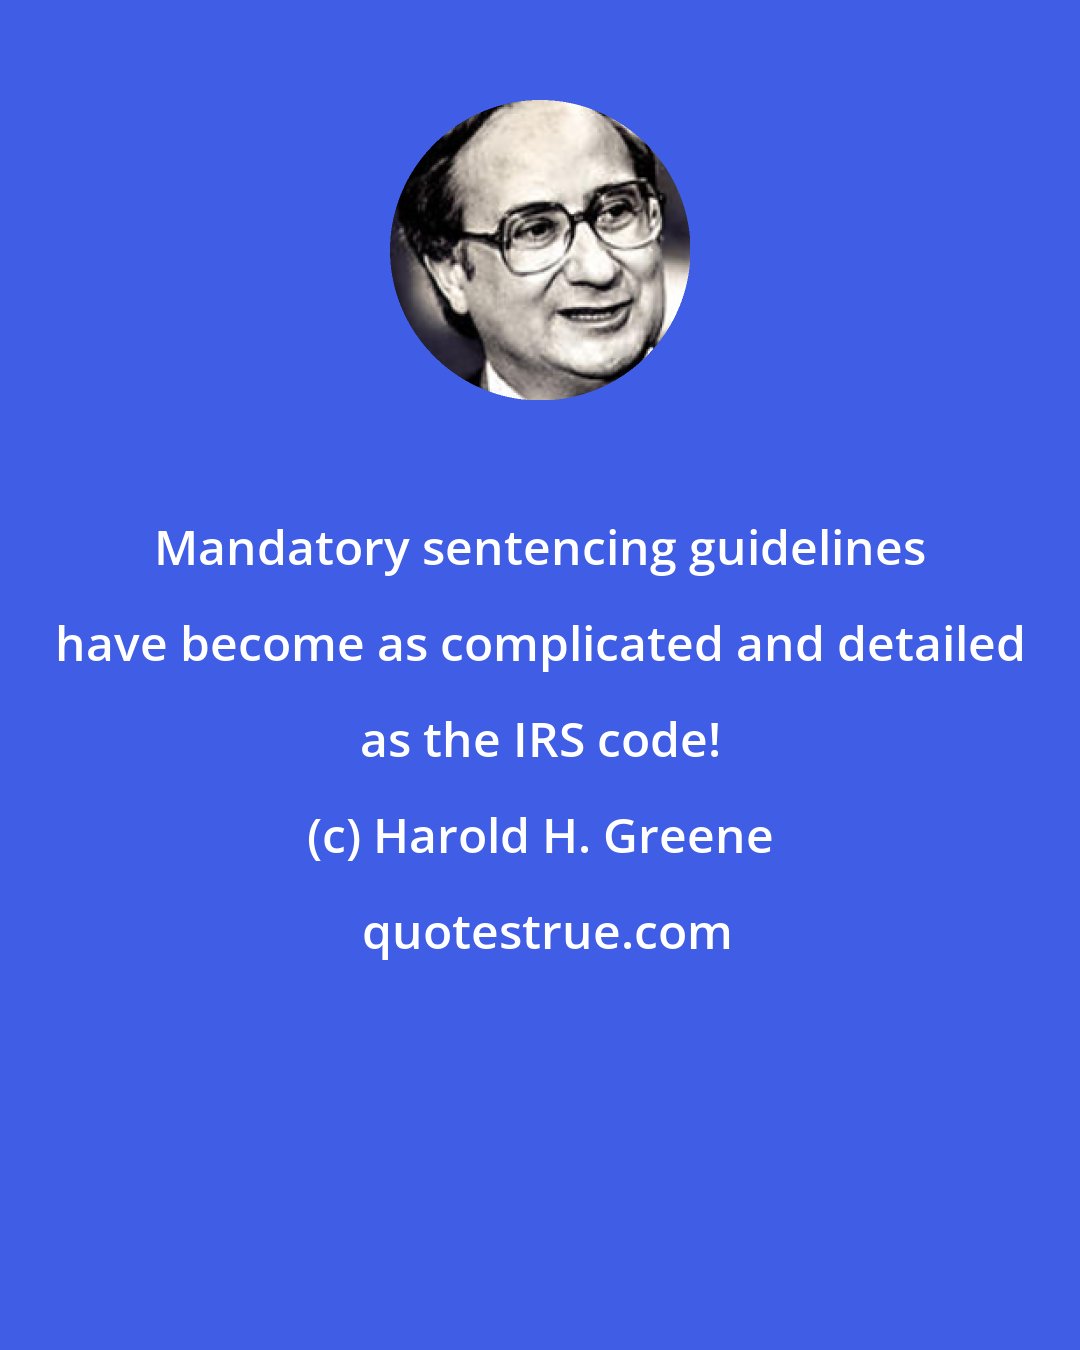 Harold H. Greene: Mandatory sentencing guidelines have become as complicated and detailed as the IRS code!